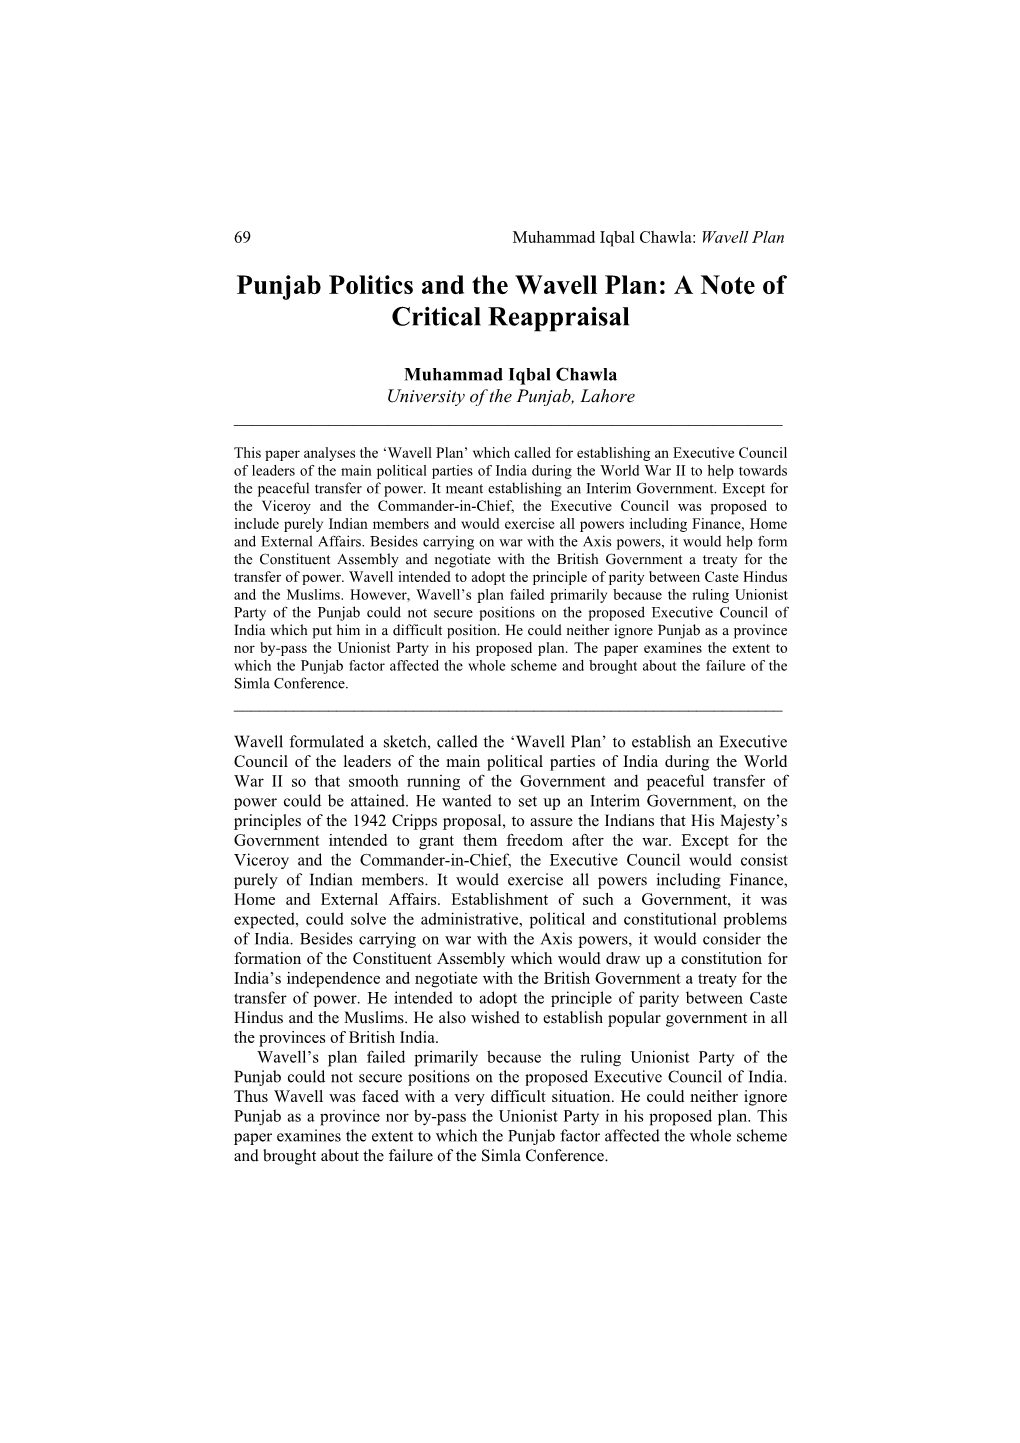 Punjab Politics and the Wavell Plan: a Note of Critical Reappraisal